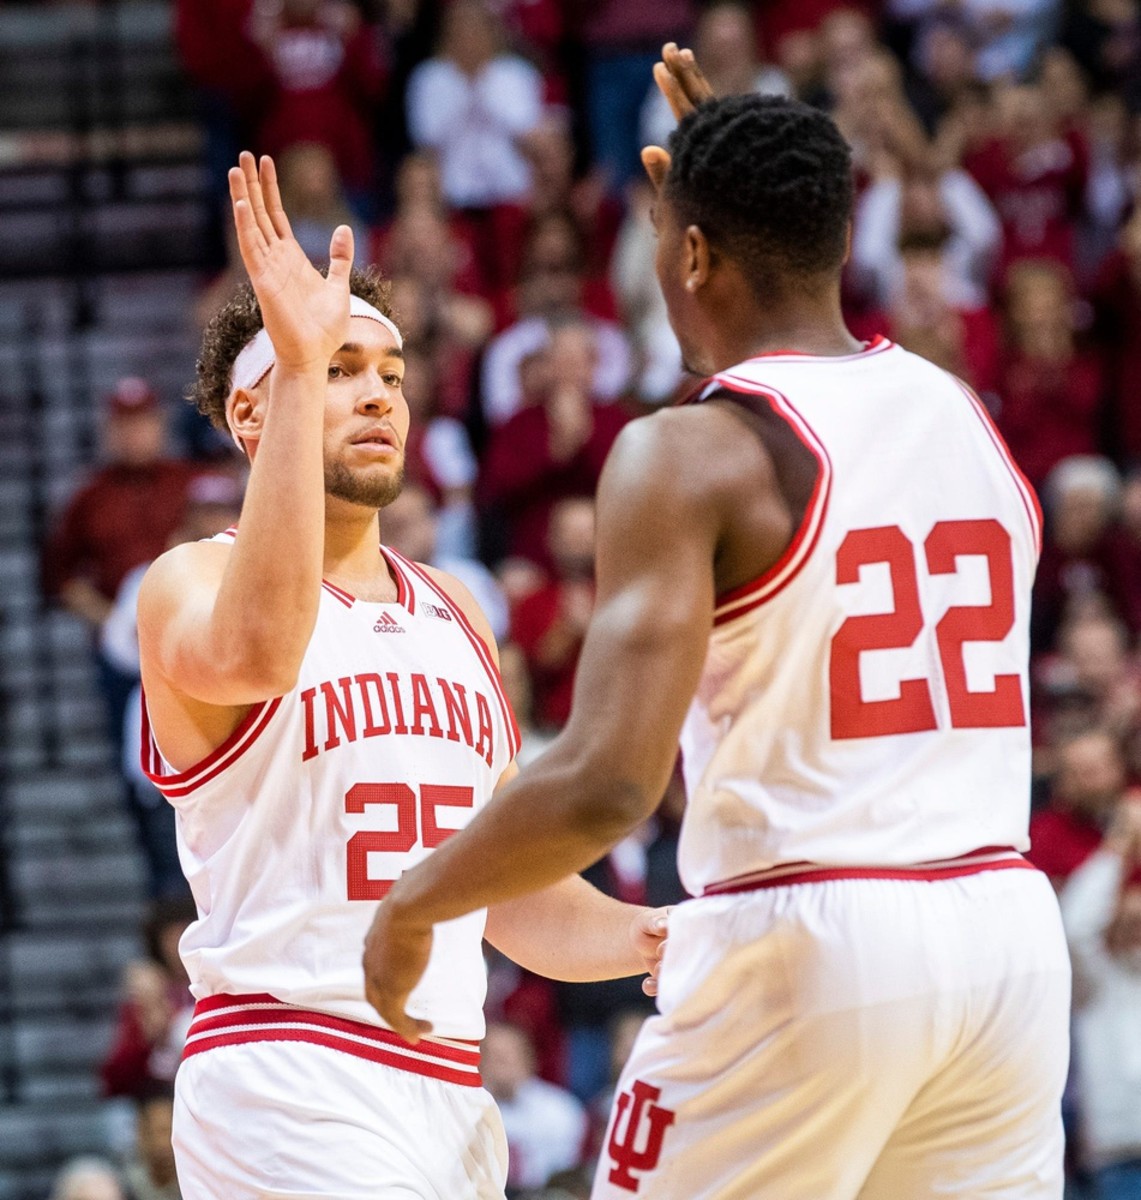 Indiana's Race Thompson (25) checks into the first game since his injury for Indiana's Jordan Geronimo (22) during the first half of the Indiana versus Michigan State game.